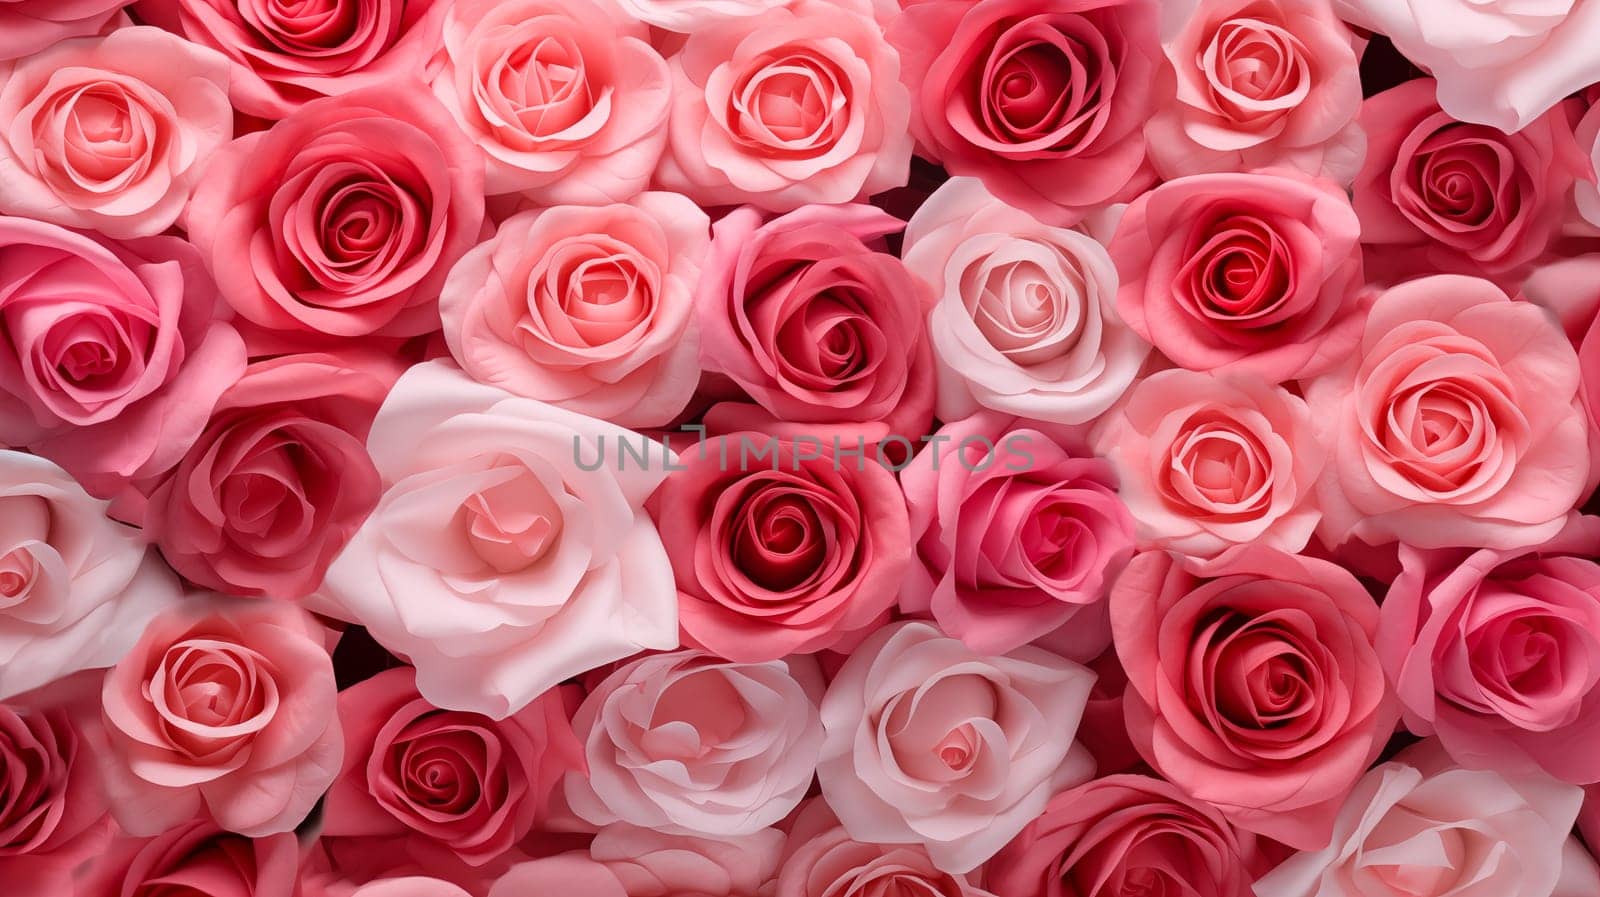 Background of Mixed Roses for Valentine’s Day by dimol